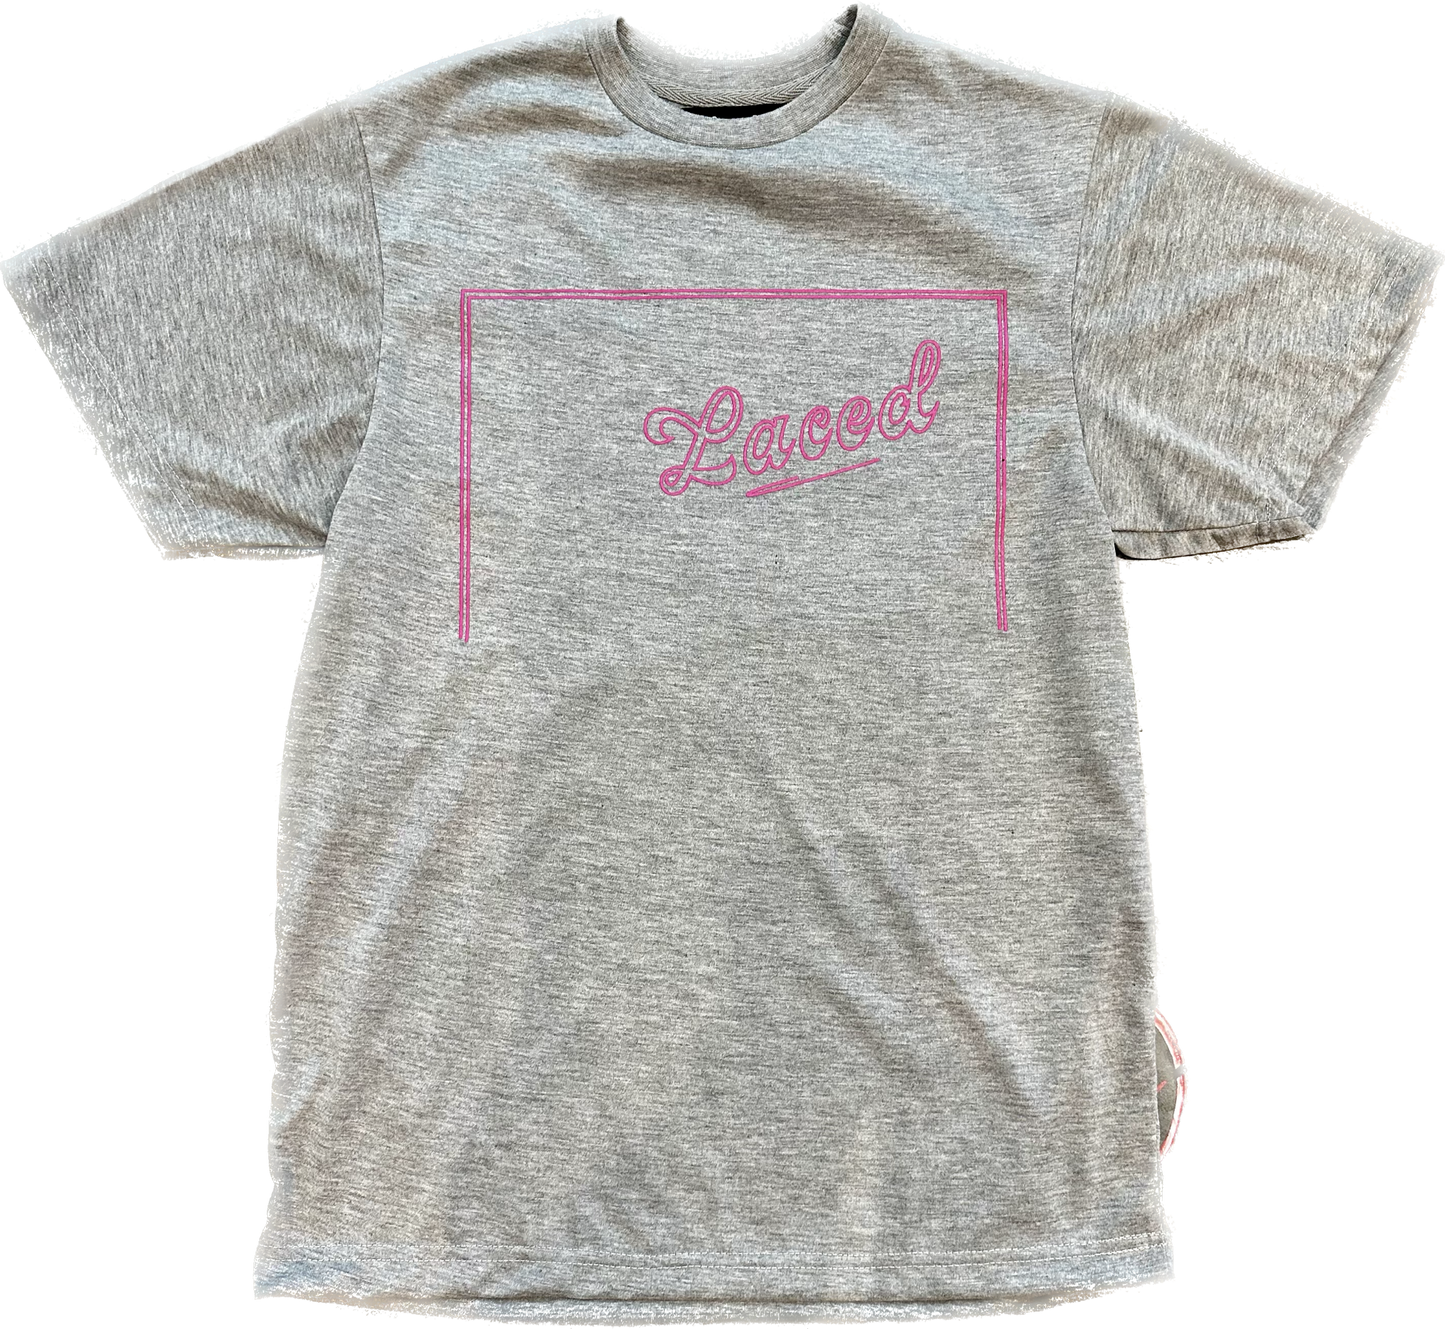 Laced Fine As Neon Tee